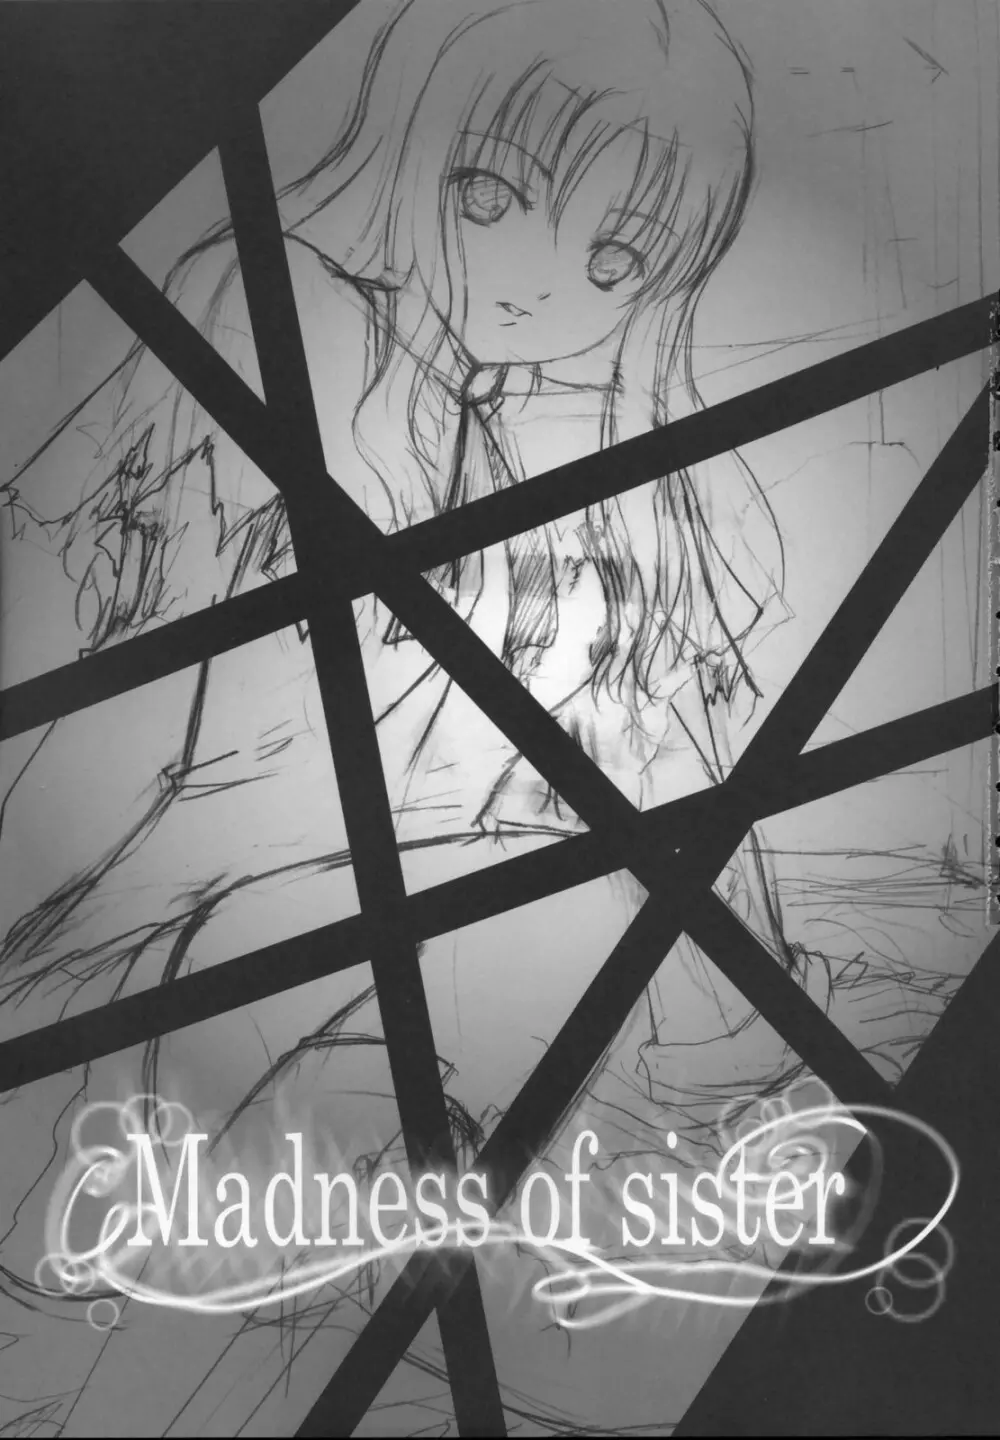 Madness of sister 2ページ